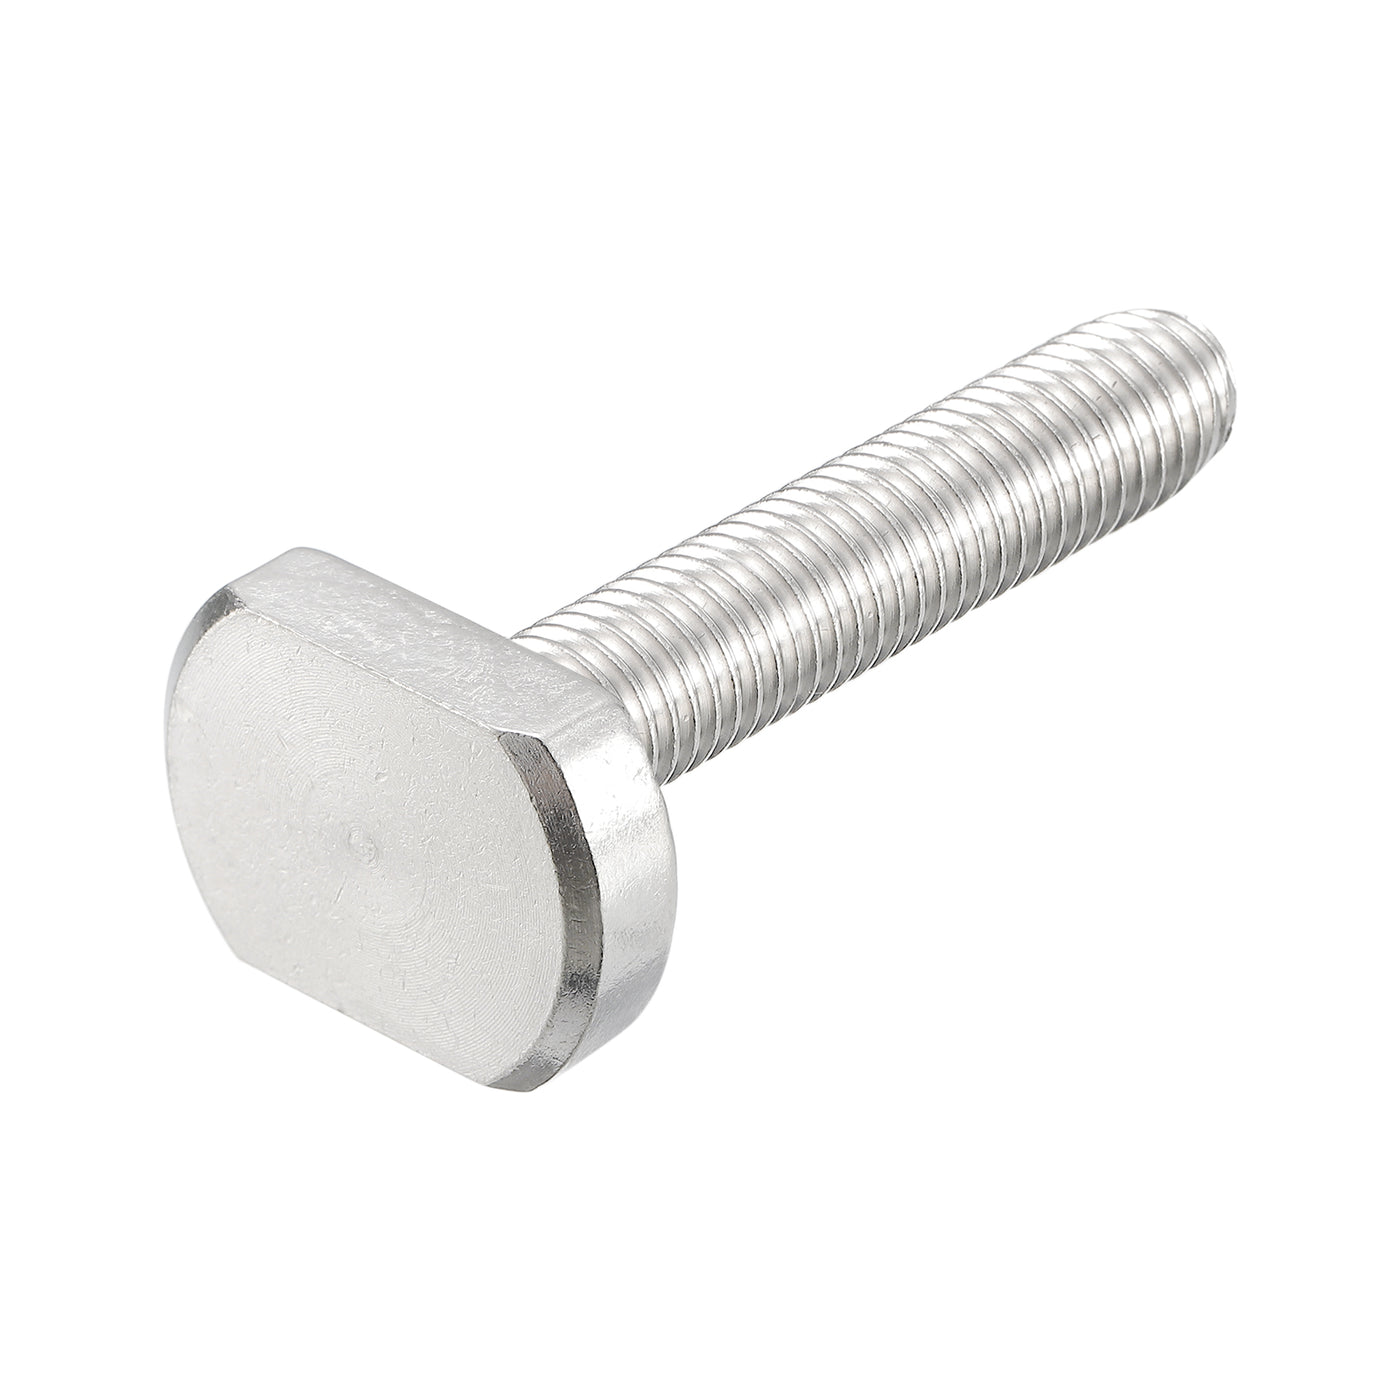 uxcell Uxcell T-Slot Bolts, 1pcs M10x50mm Drop-in Stud Sliding Bolts 304 Stainless Steel